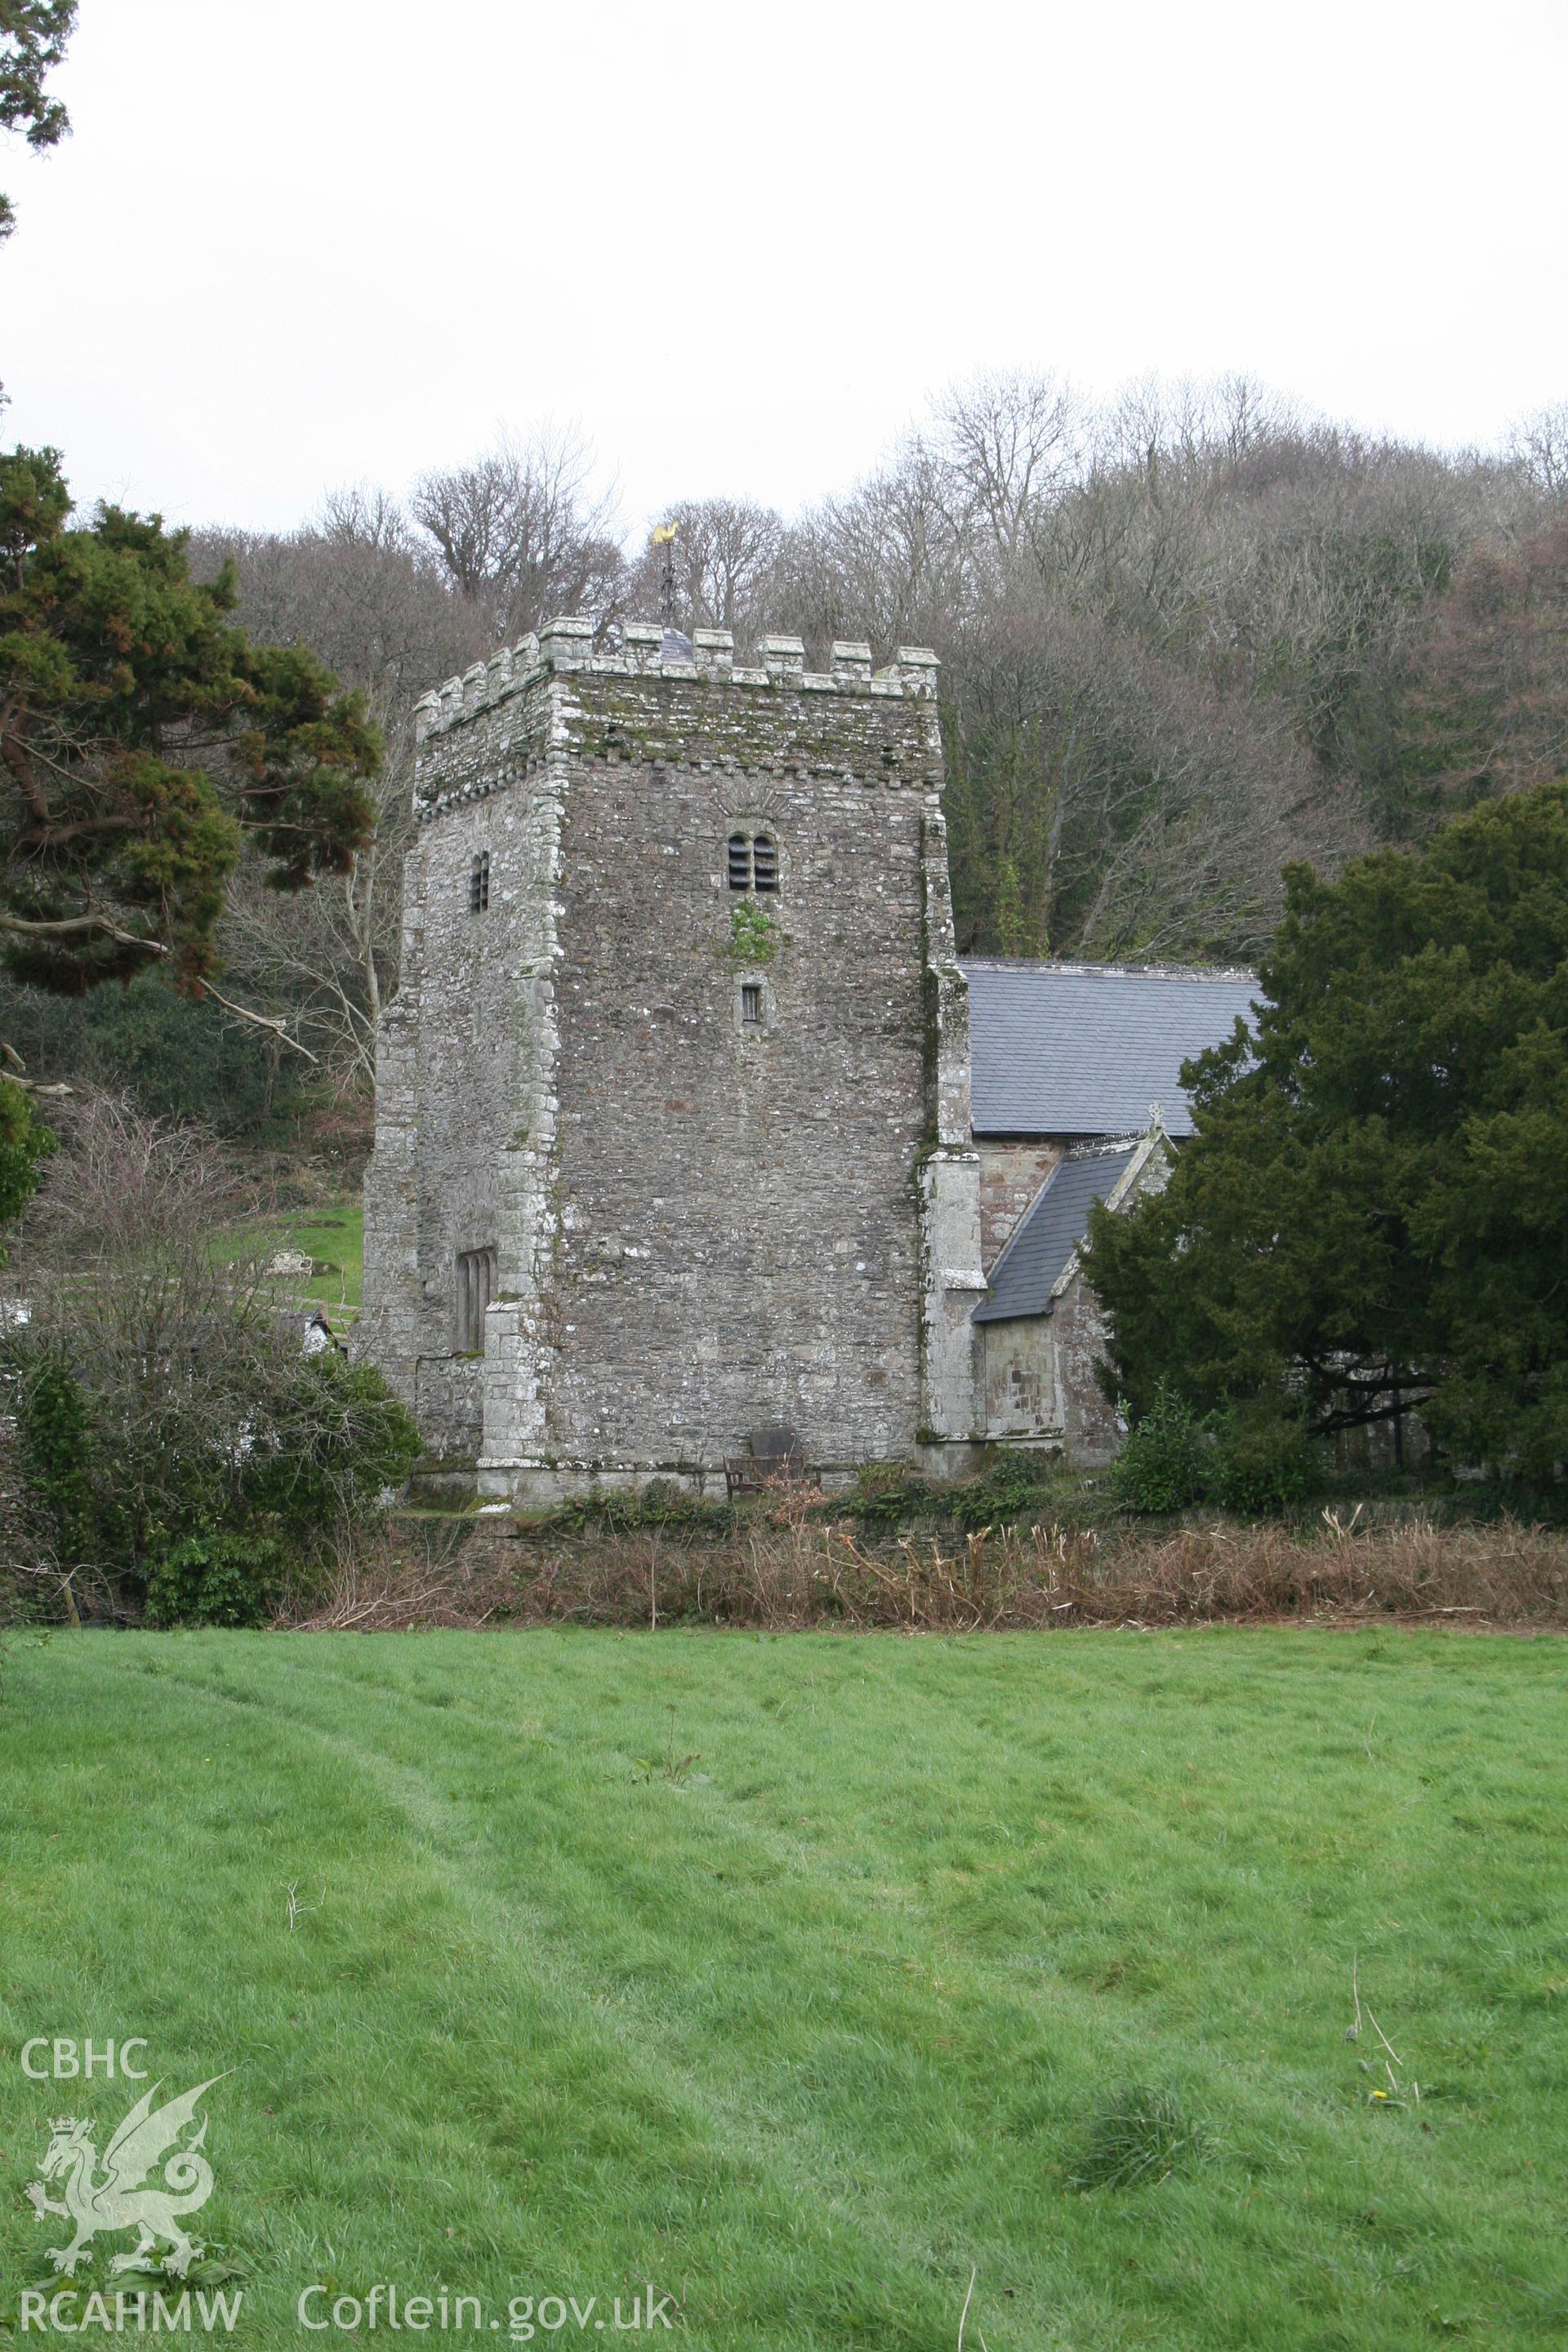 St Brynach's Church, Nevern. March 2007. Exterior view of church tower looking north.